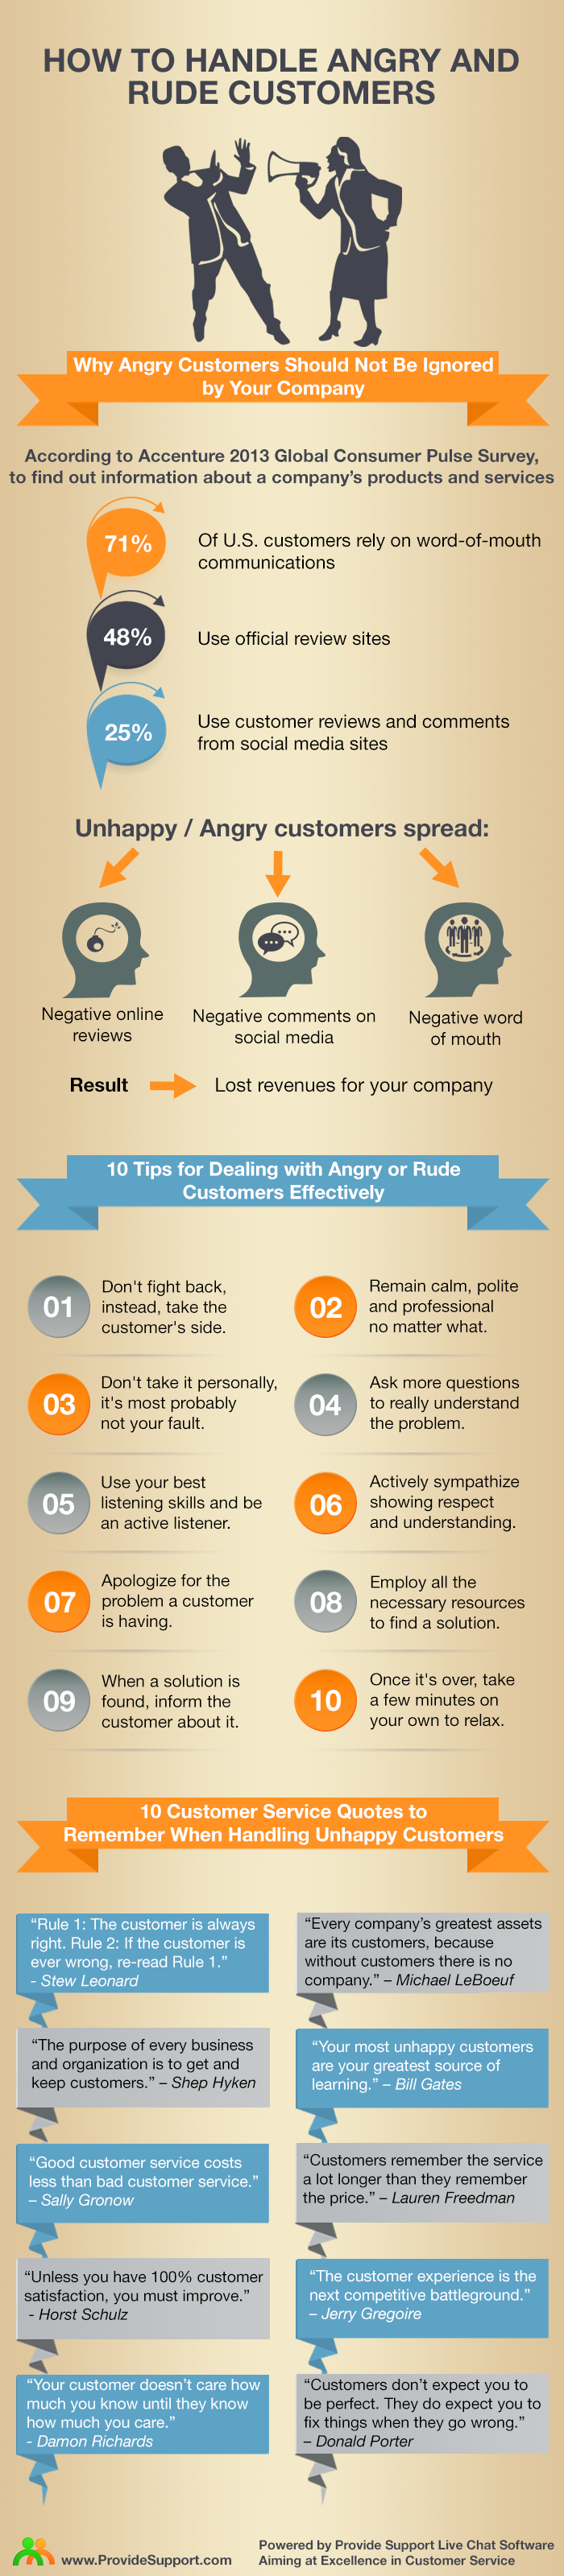 How to Handle Angry Customers [Inforgrafic from Provide Support]